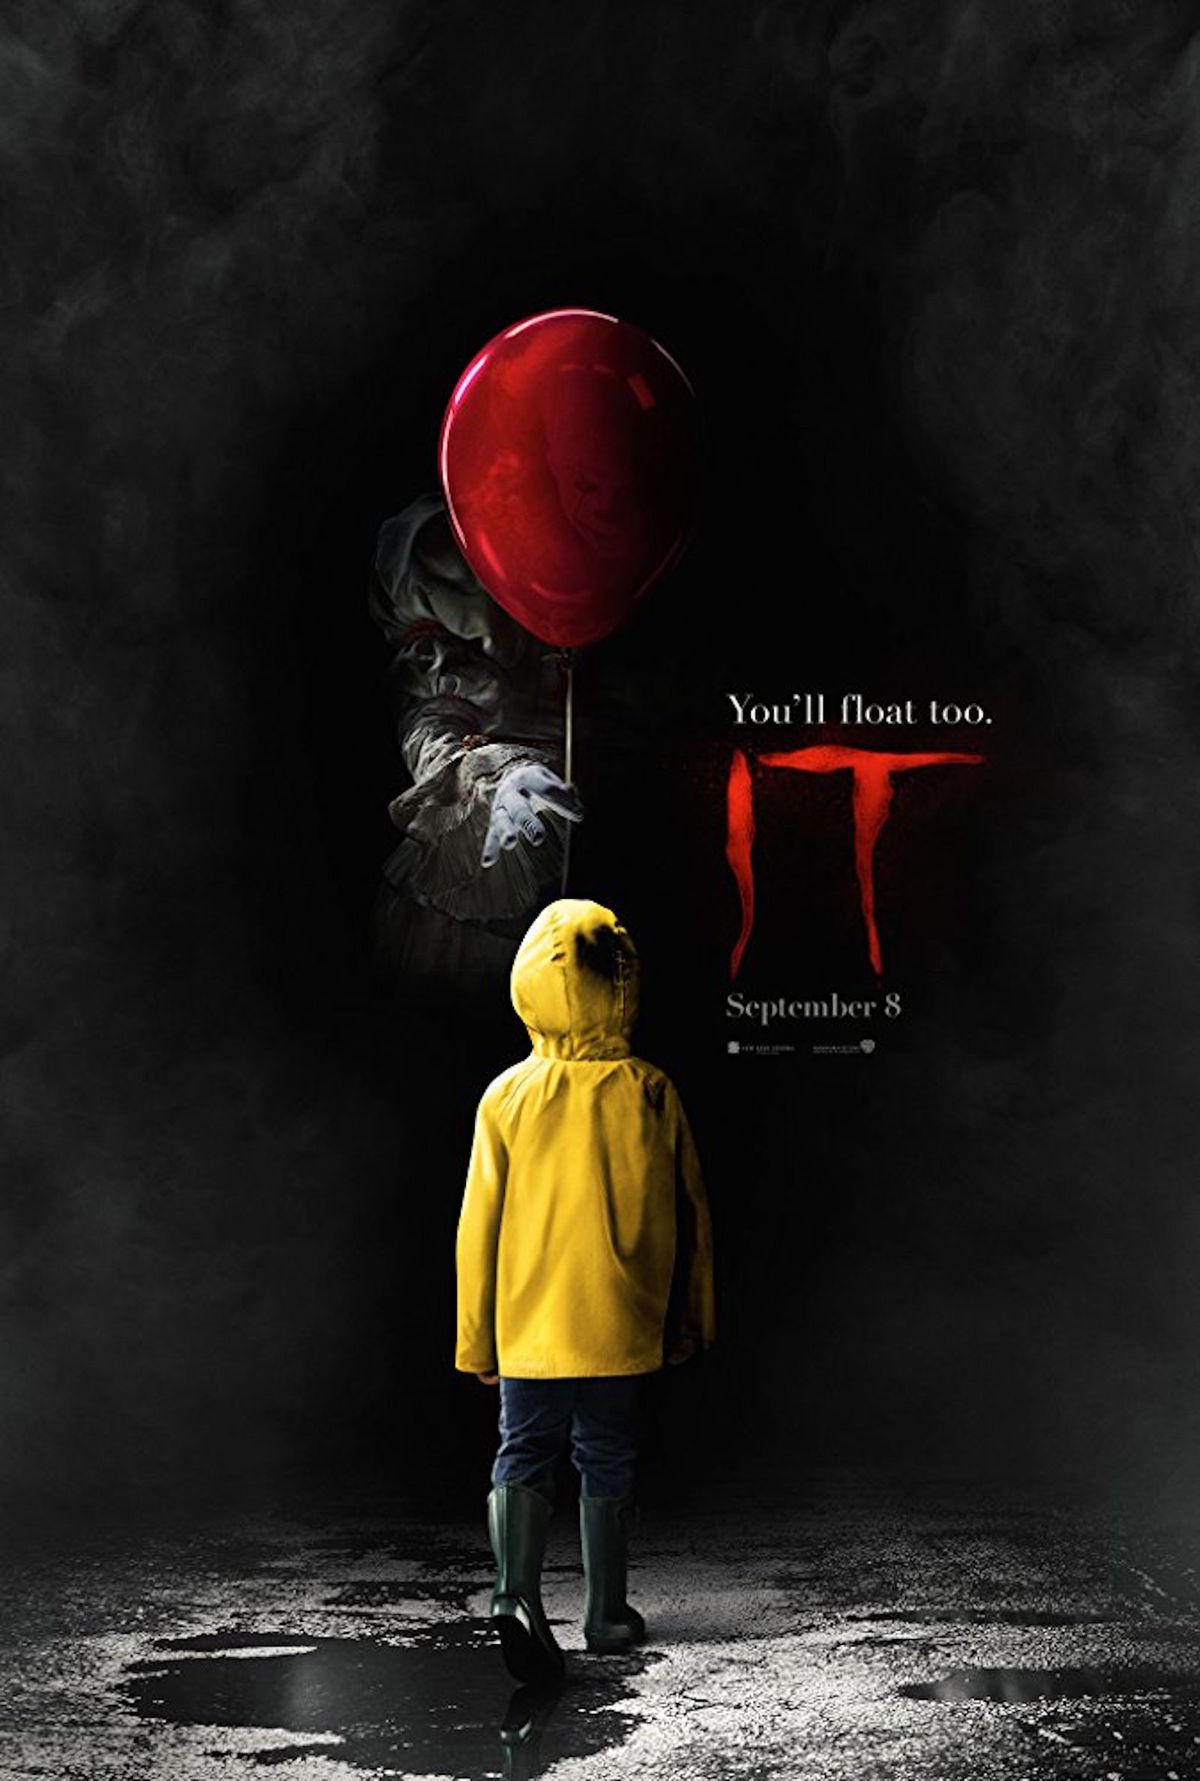 5 Reactions "It" Made Everyone Feel